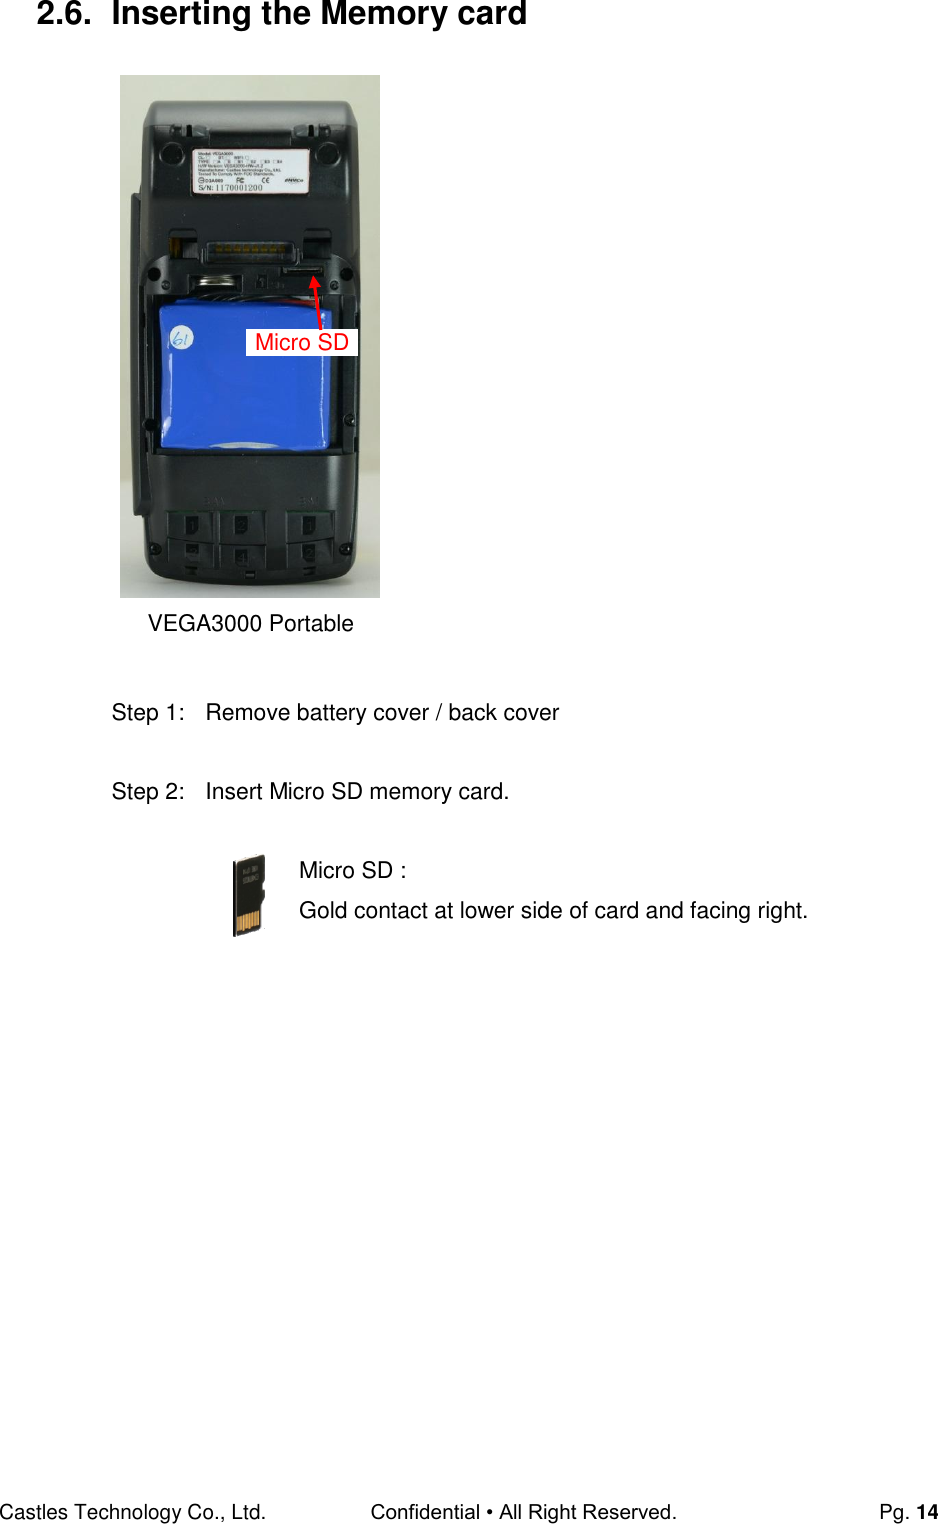 Castles Technology Co., Ltd. Confidential • All Right Reserved.  Pg. 14 2.6.  Inserting the Memory card                      Step 1:  Remove battery cover / back cover  Step 2:  Insert Micro SD memory card.  Micro SD : Gold contact at lower side of card and facing right.      Micro SD VEGA3000 Portable 